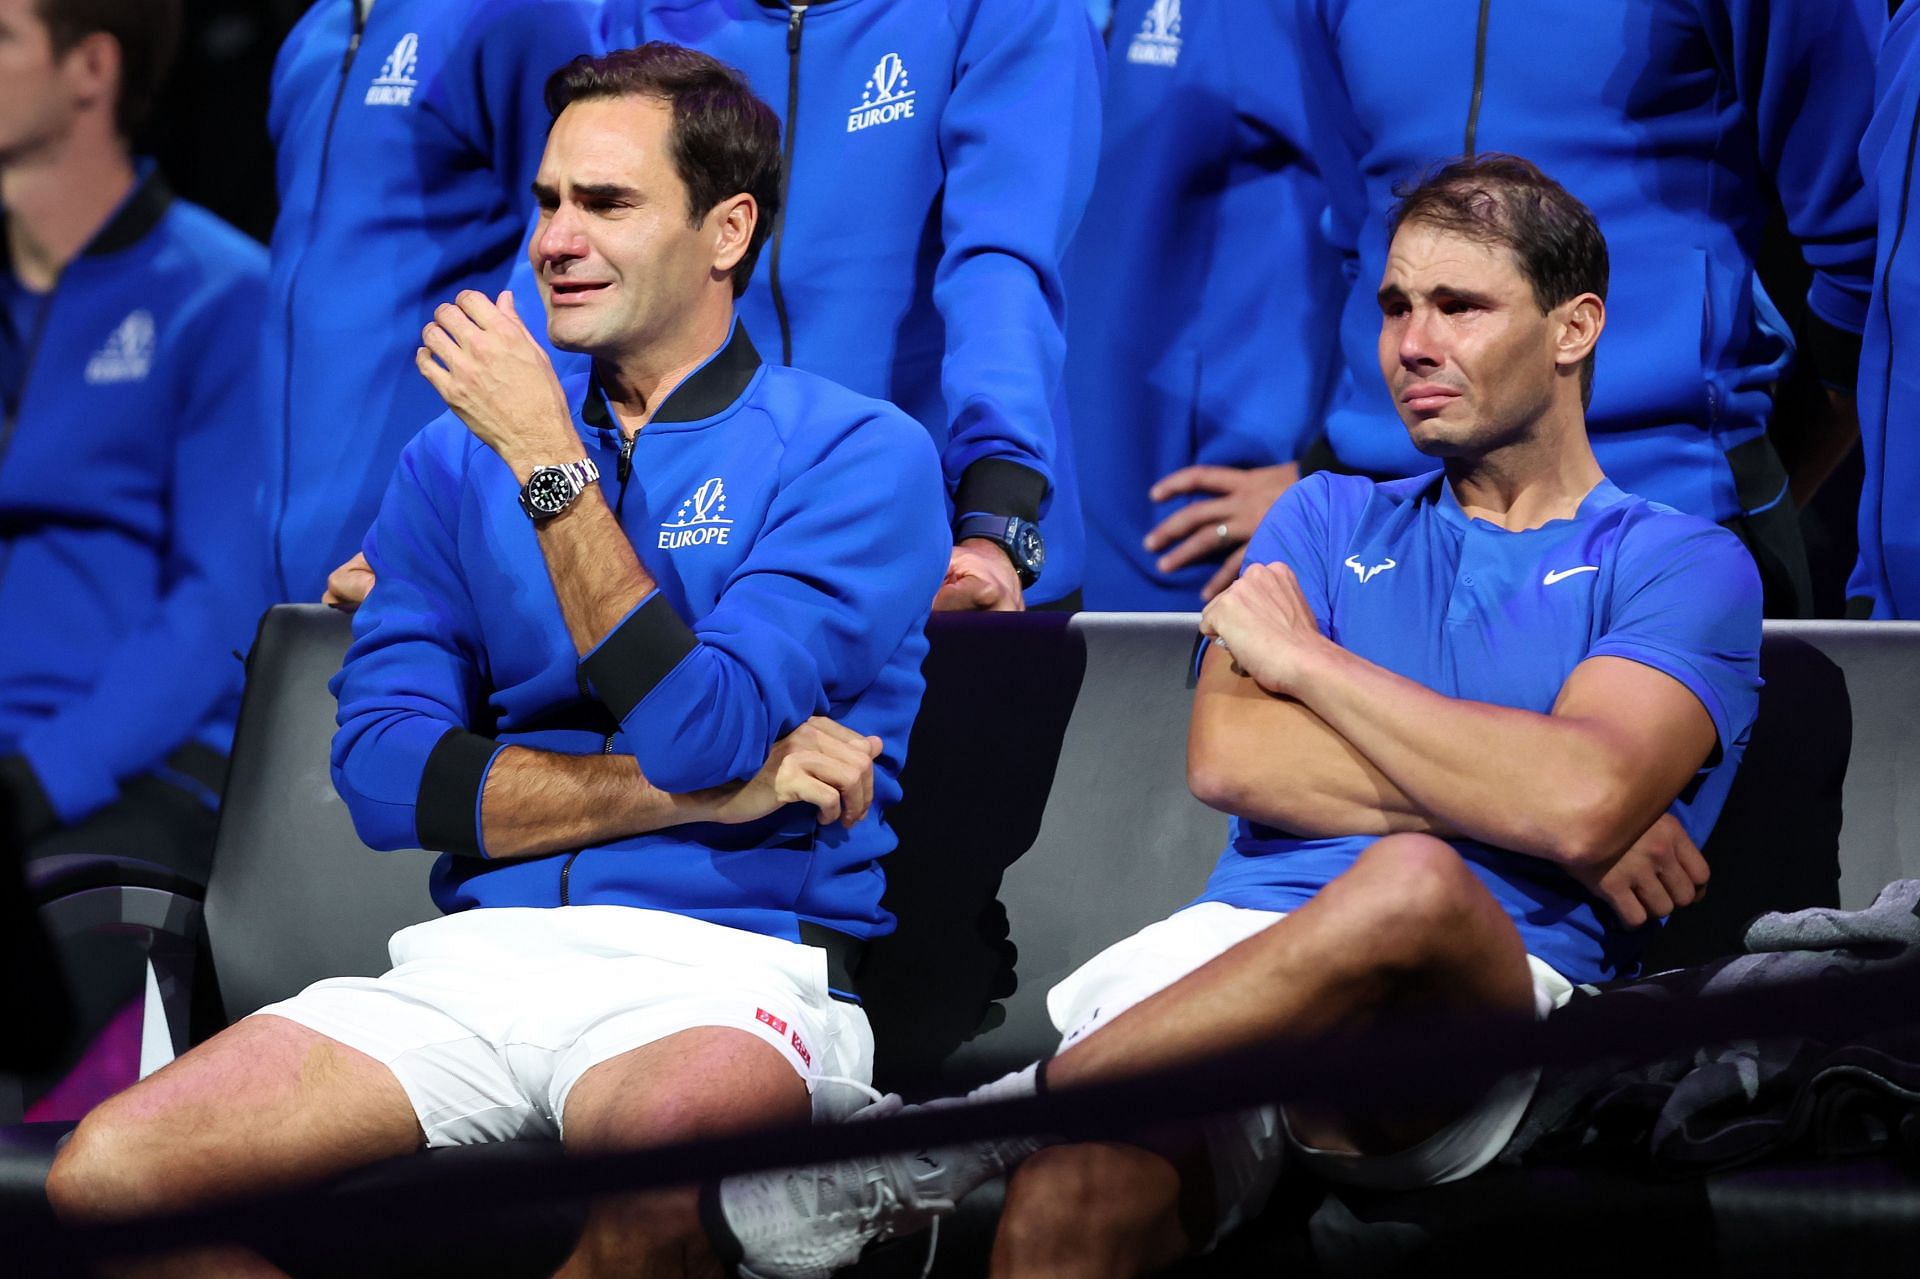 Roger Federer and Rafael Nadal during the Laver Cup